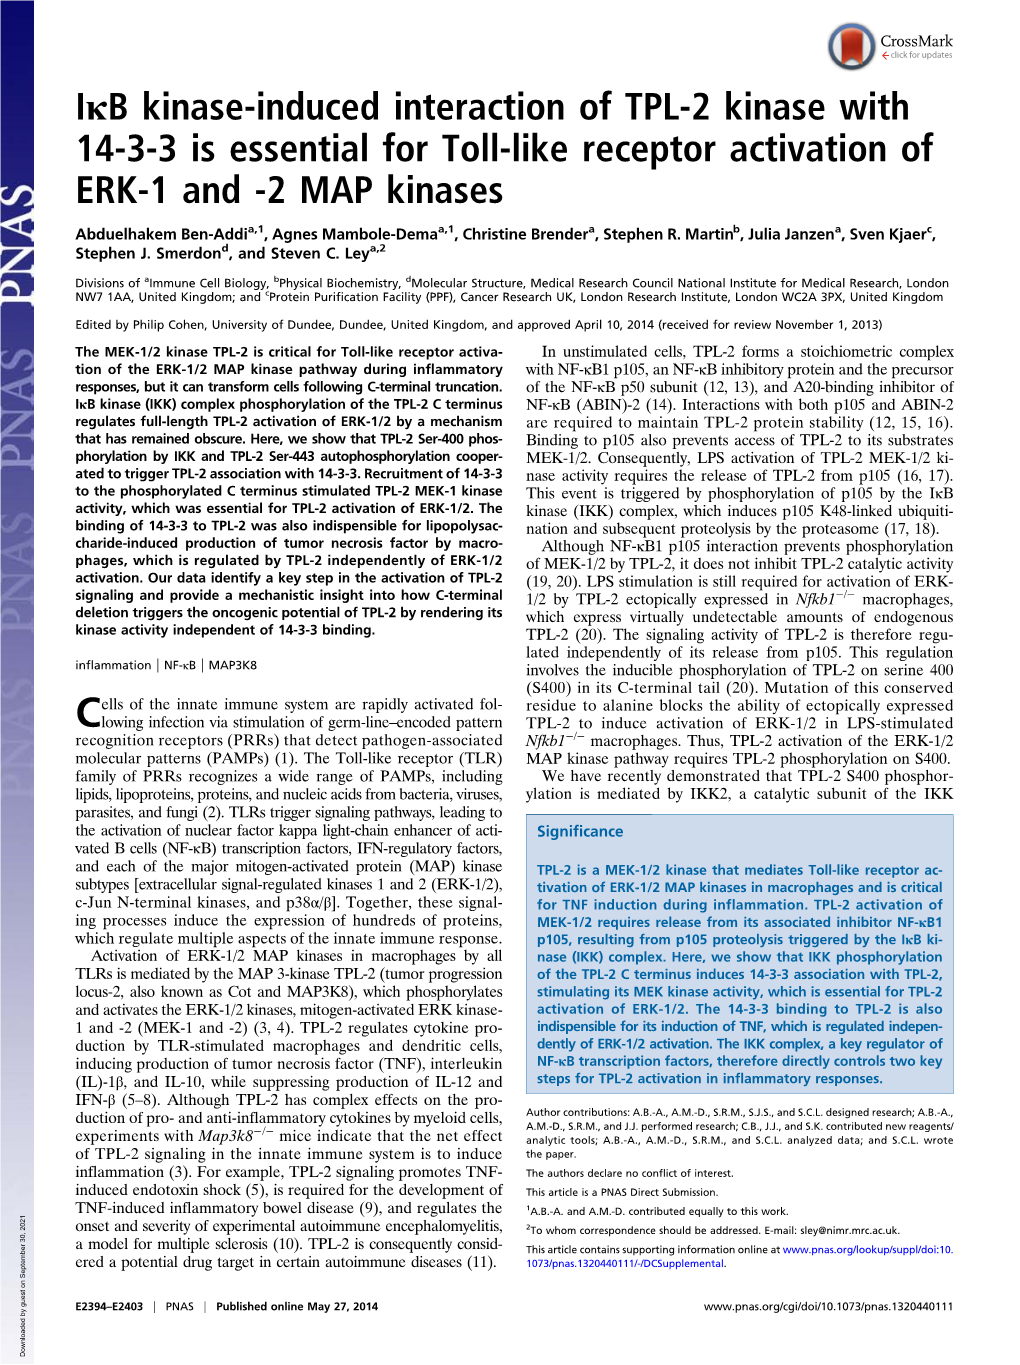 Iκb Kinase-Induced Interaction of TPL-2 Kinase with 14-3-3 Is Essential for Toll-Like Receptor Activation of ERK-1 and -2 MAP Kinases